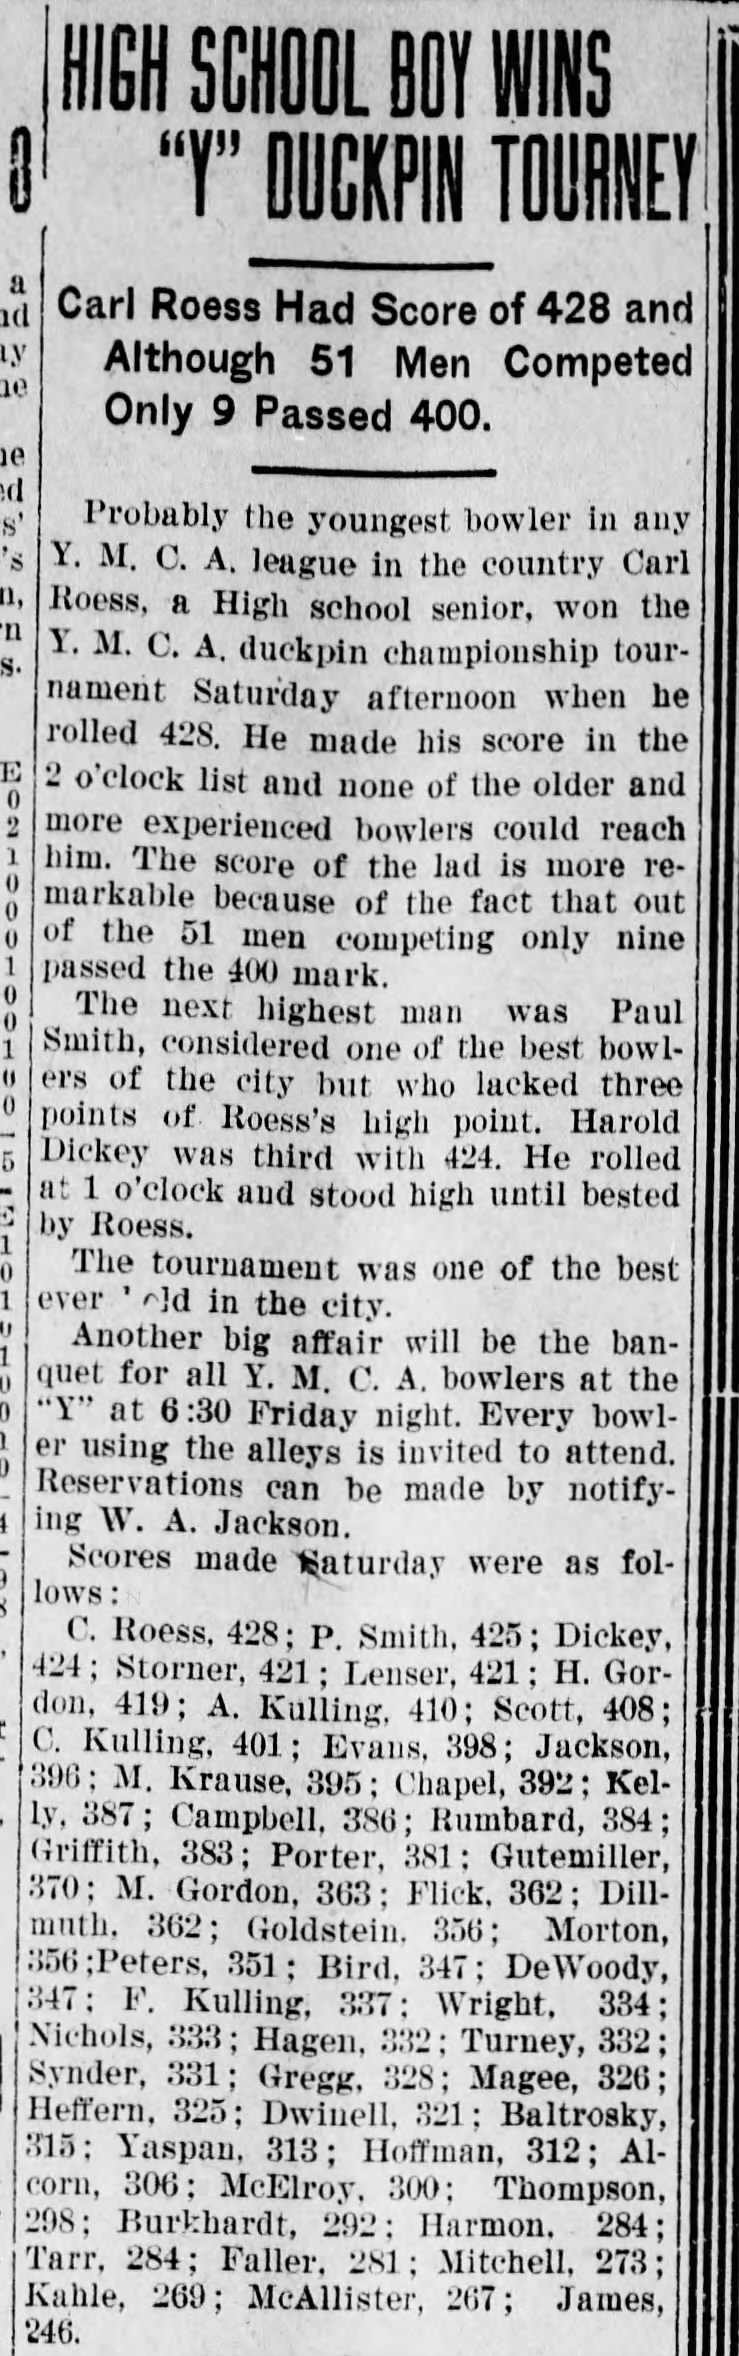 Carl Roess Wins Bowling Tournament, The News-Herald, 23 Apr 1923, pg 10